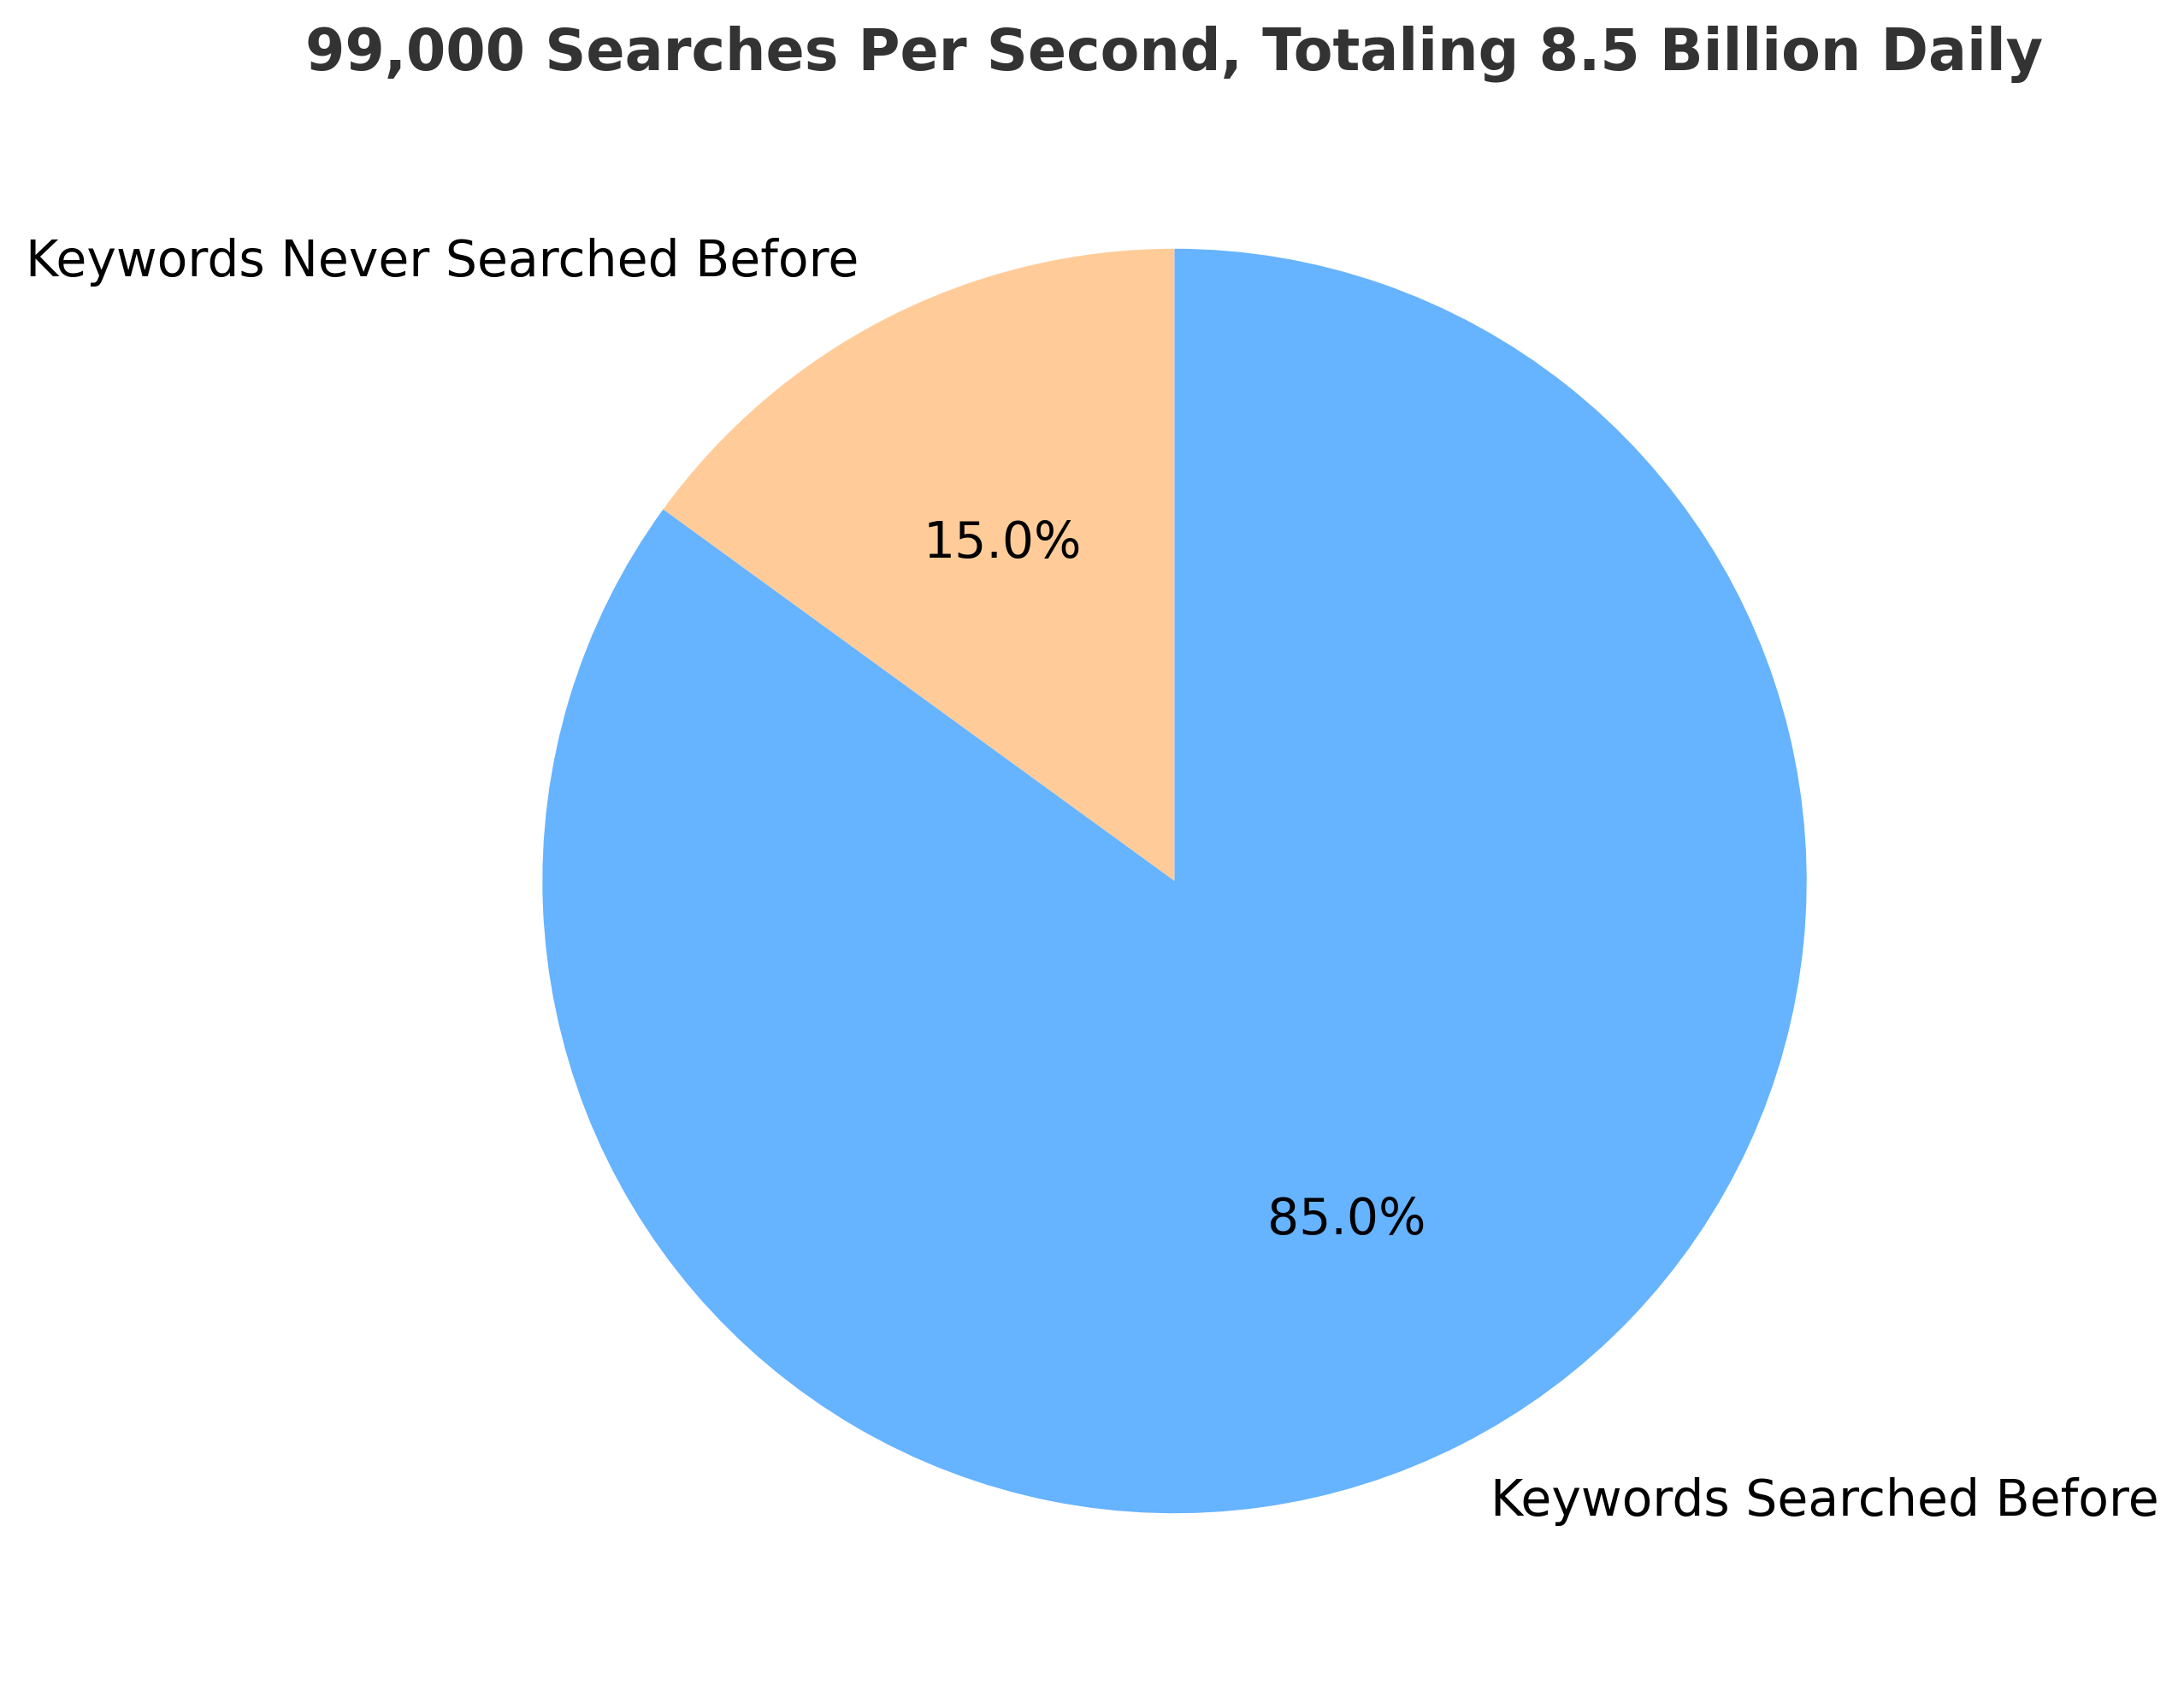 keyword_search_frequency_pie_chart